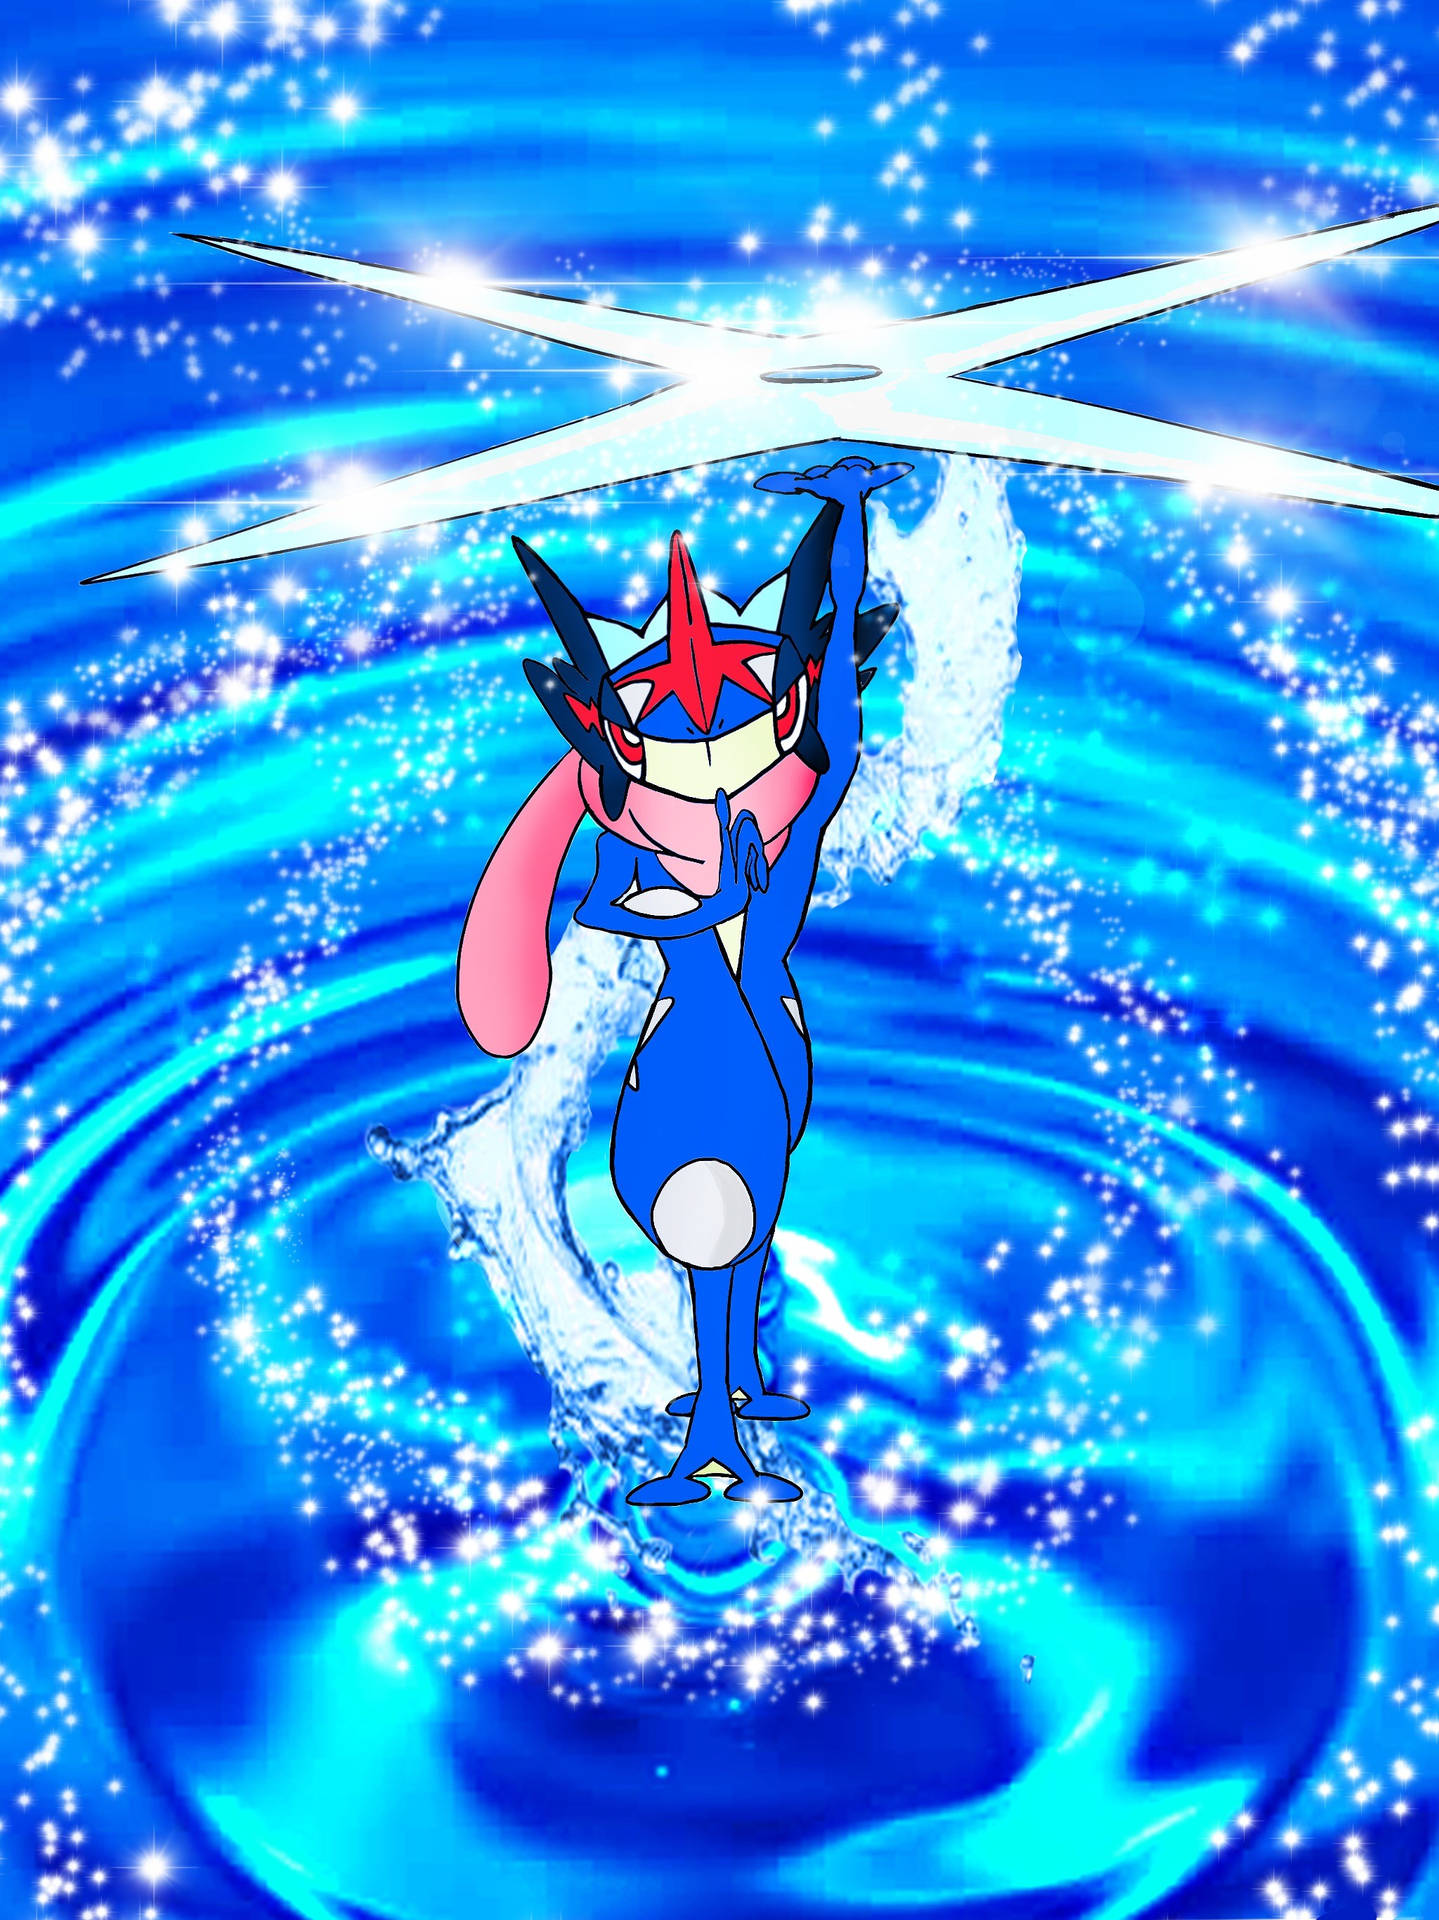 This Greninja Is Ready To Battle! Background